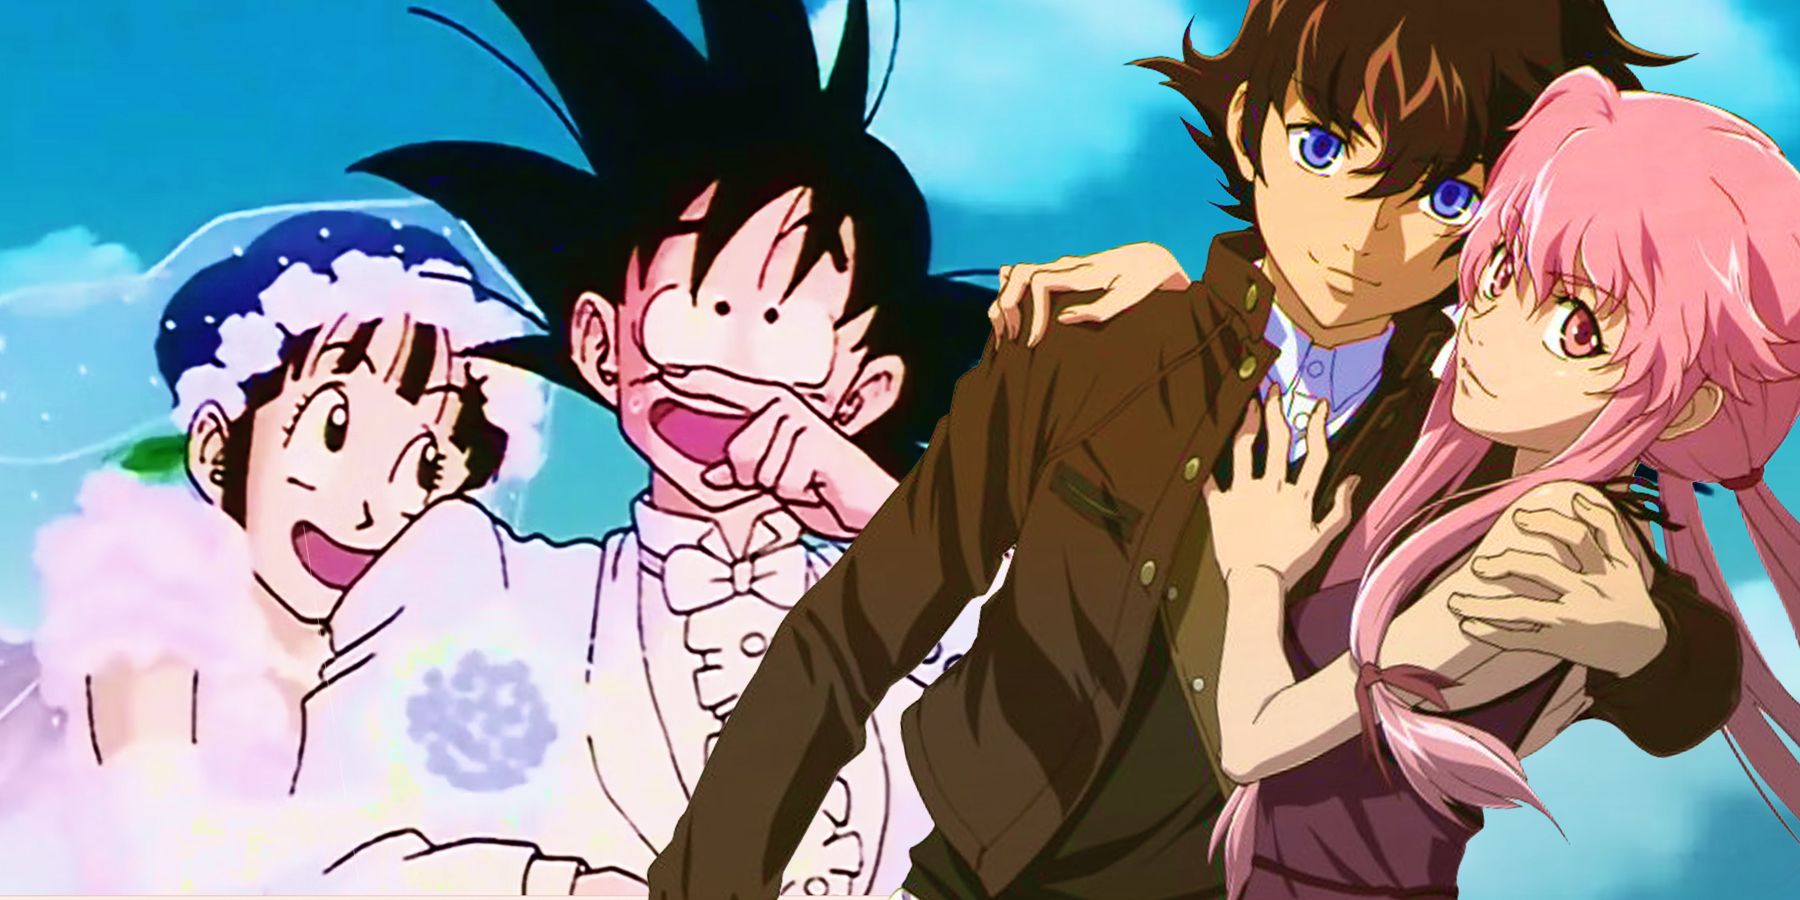 10 Shonen Anime That Are So Bad They're Good